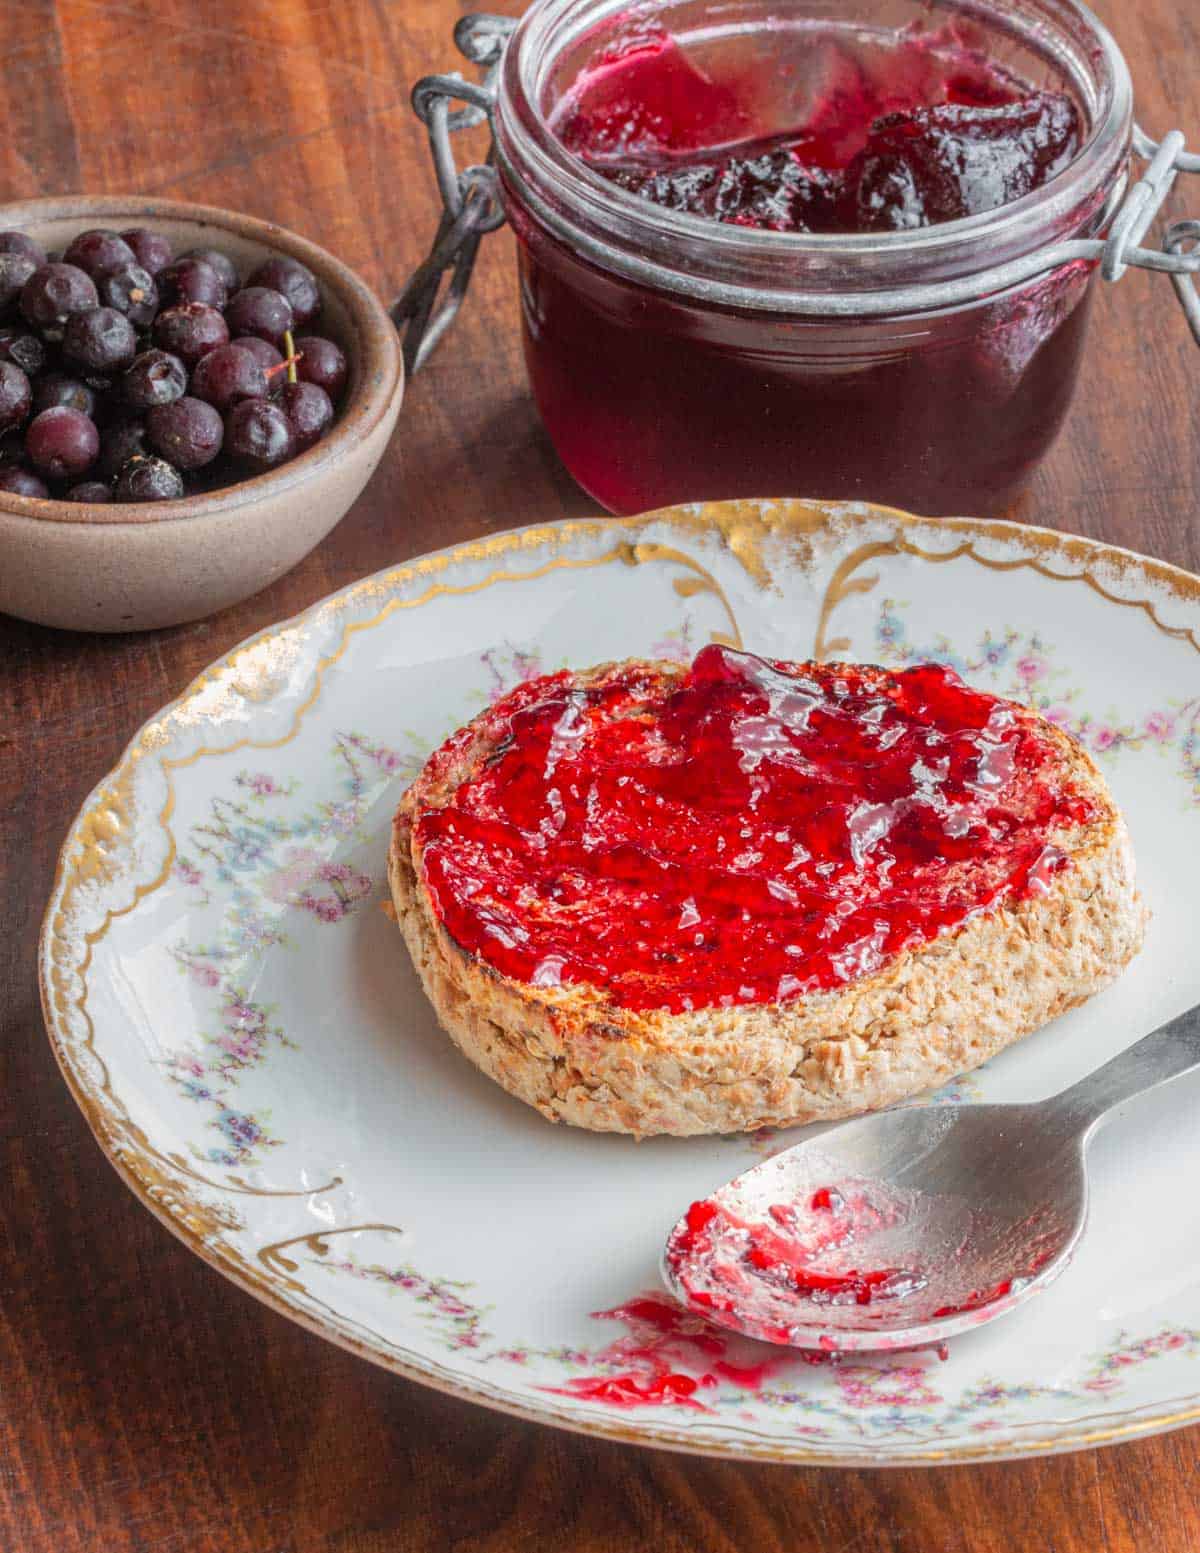 Choke cherry jelly spread on an English muffin next to a jar of jelly and a bowl of wild cherries.